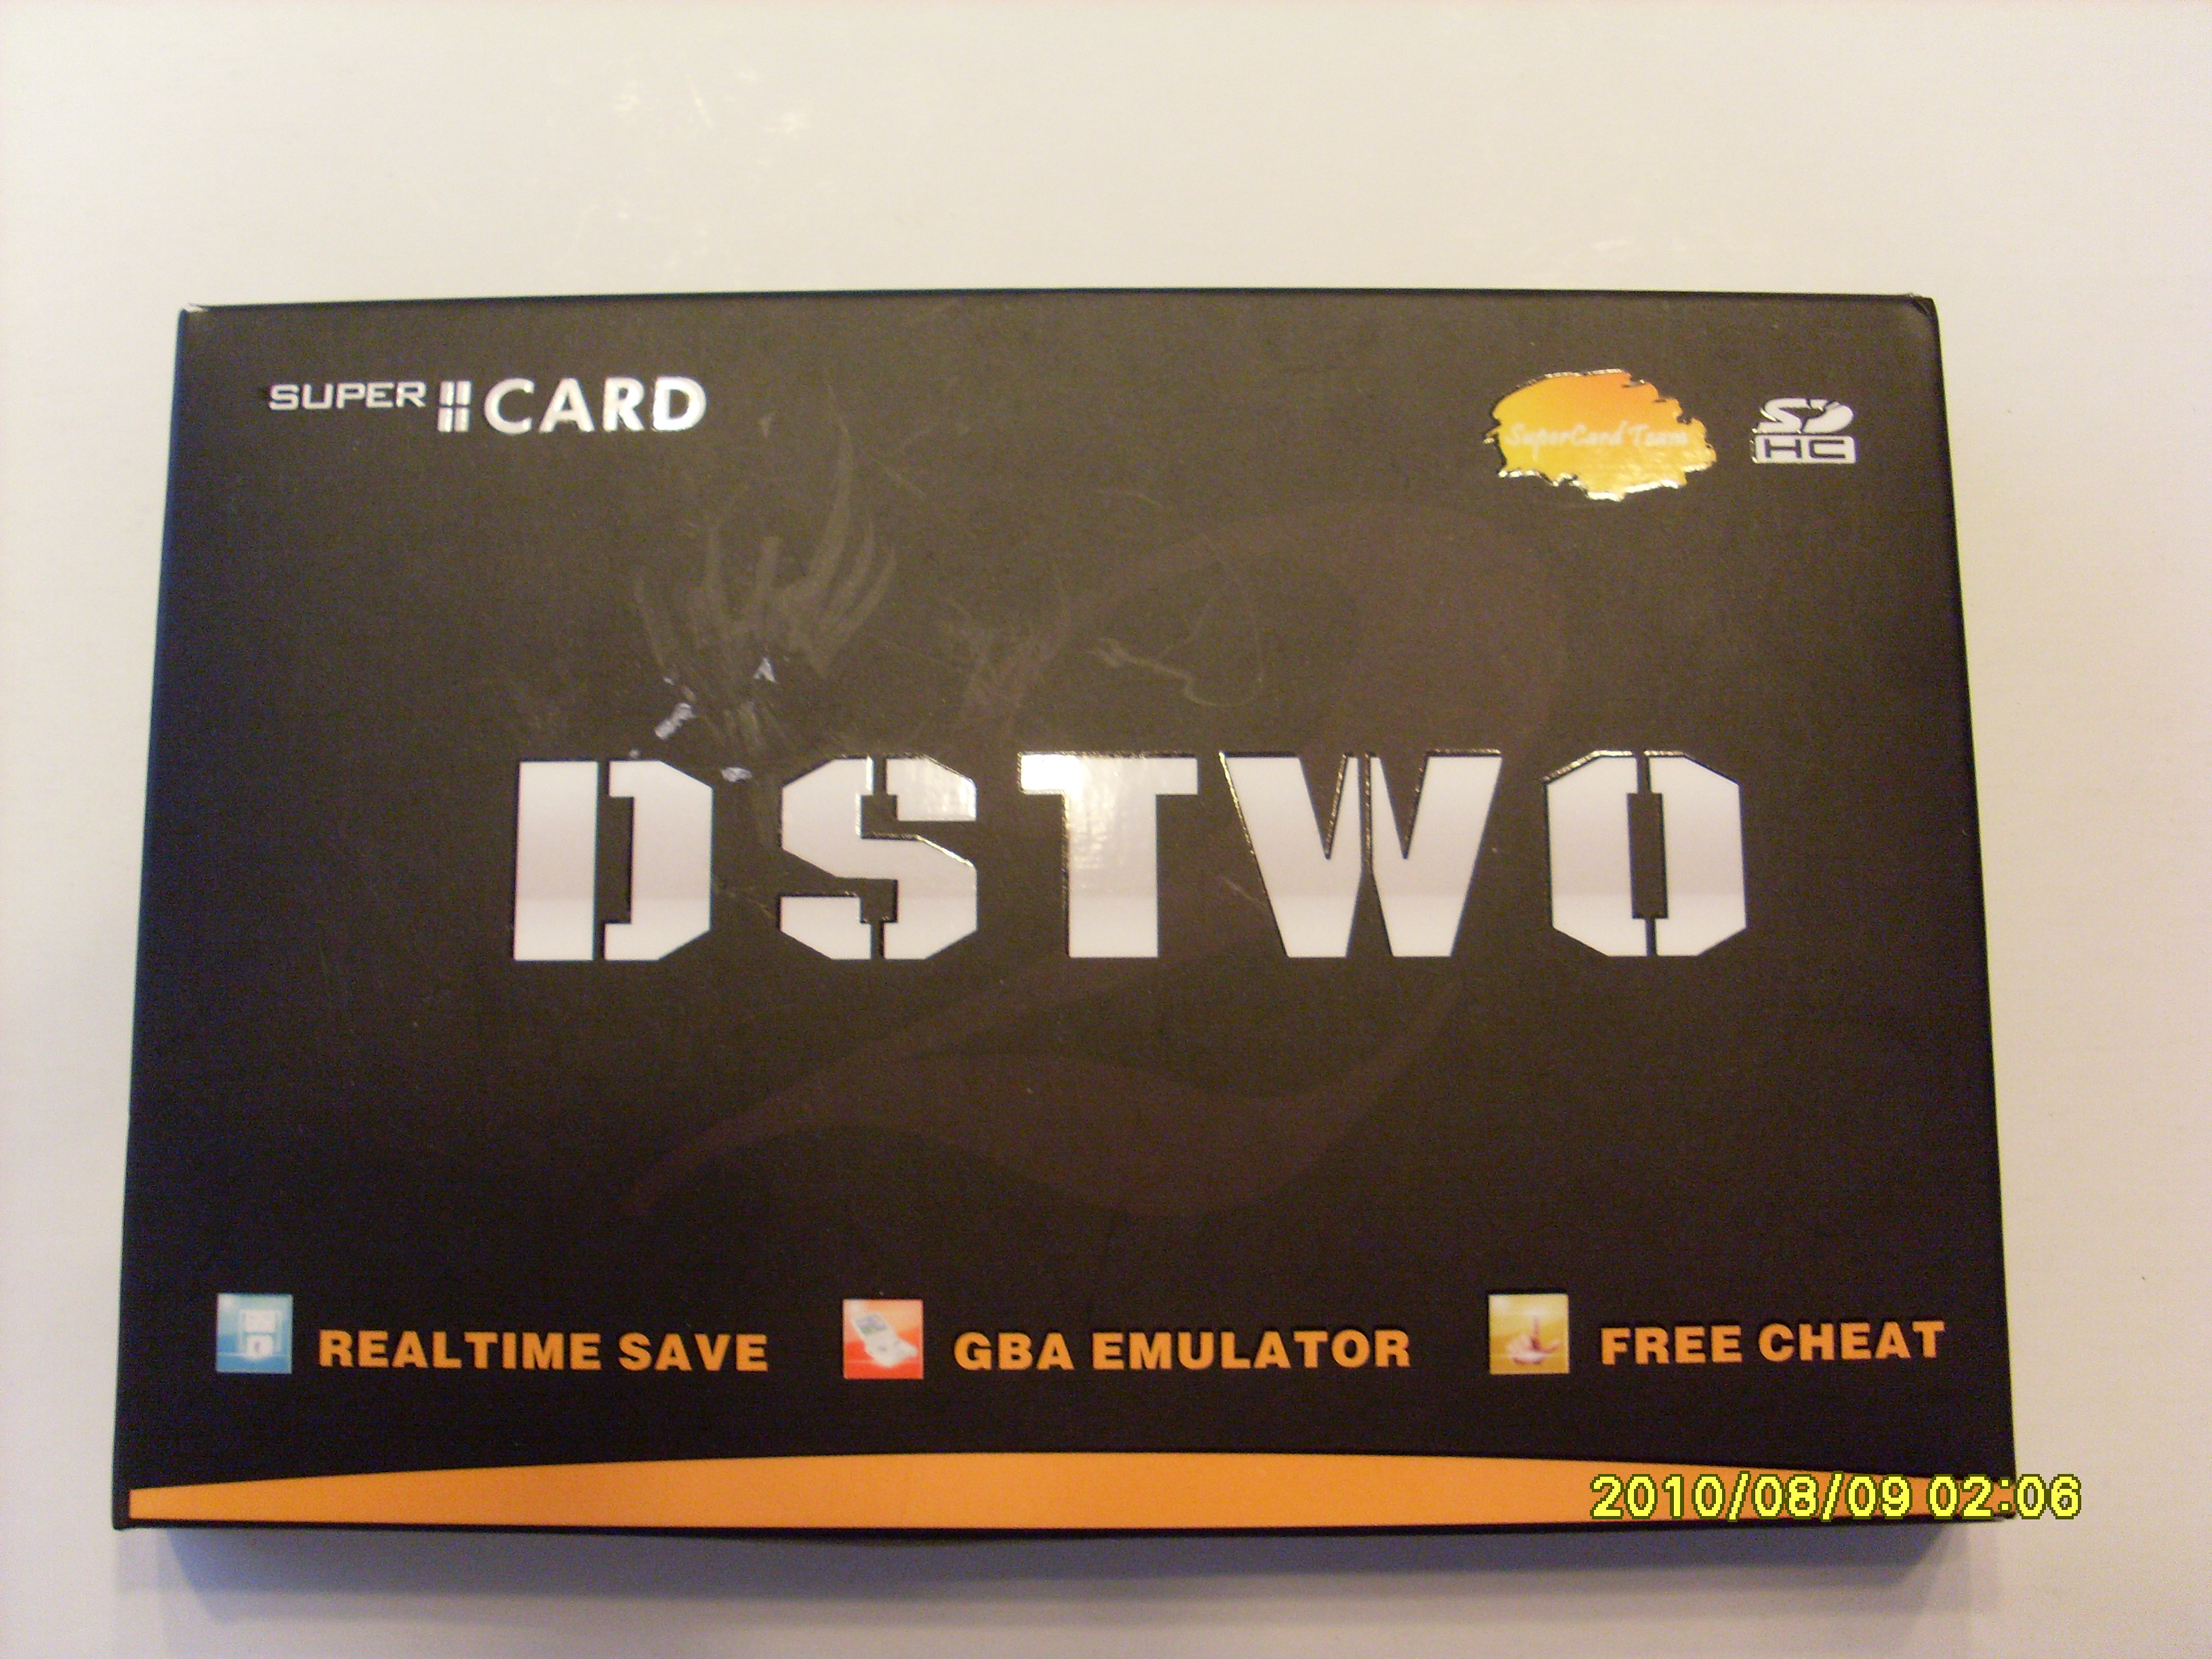 supercard dstwo